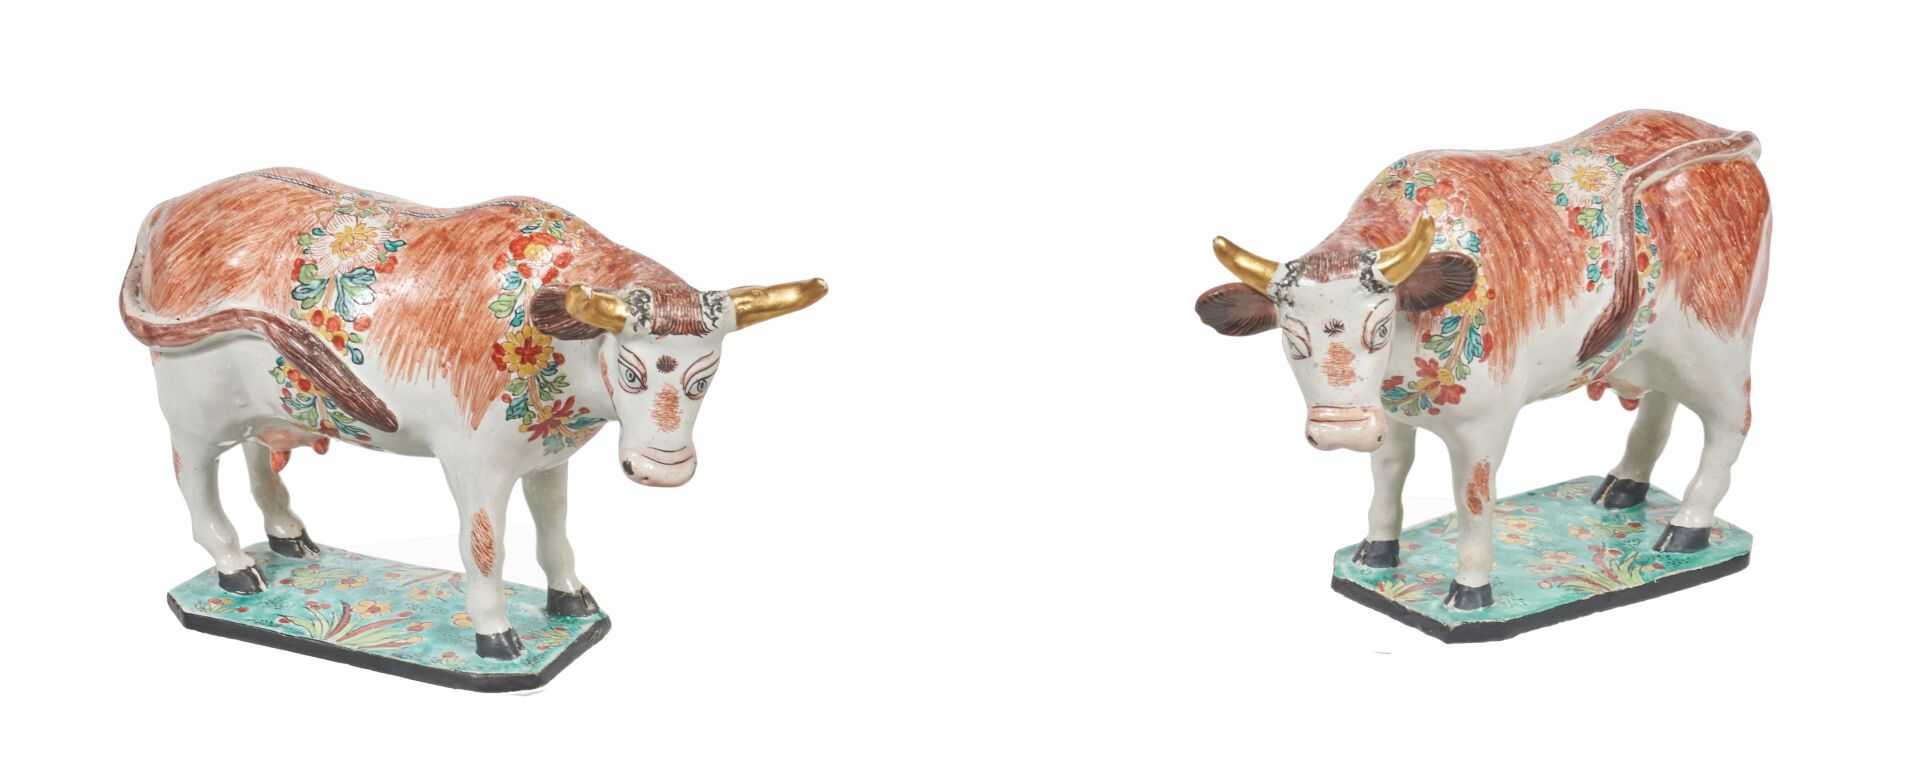 Null Delft
Pair of earthenware cows standing on rectangular bases with polychrom&hellip;